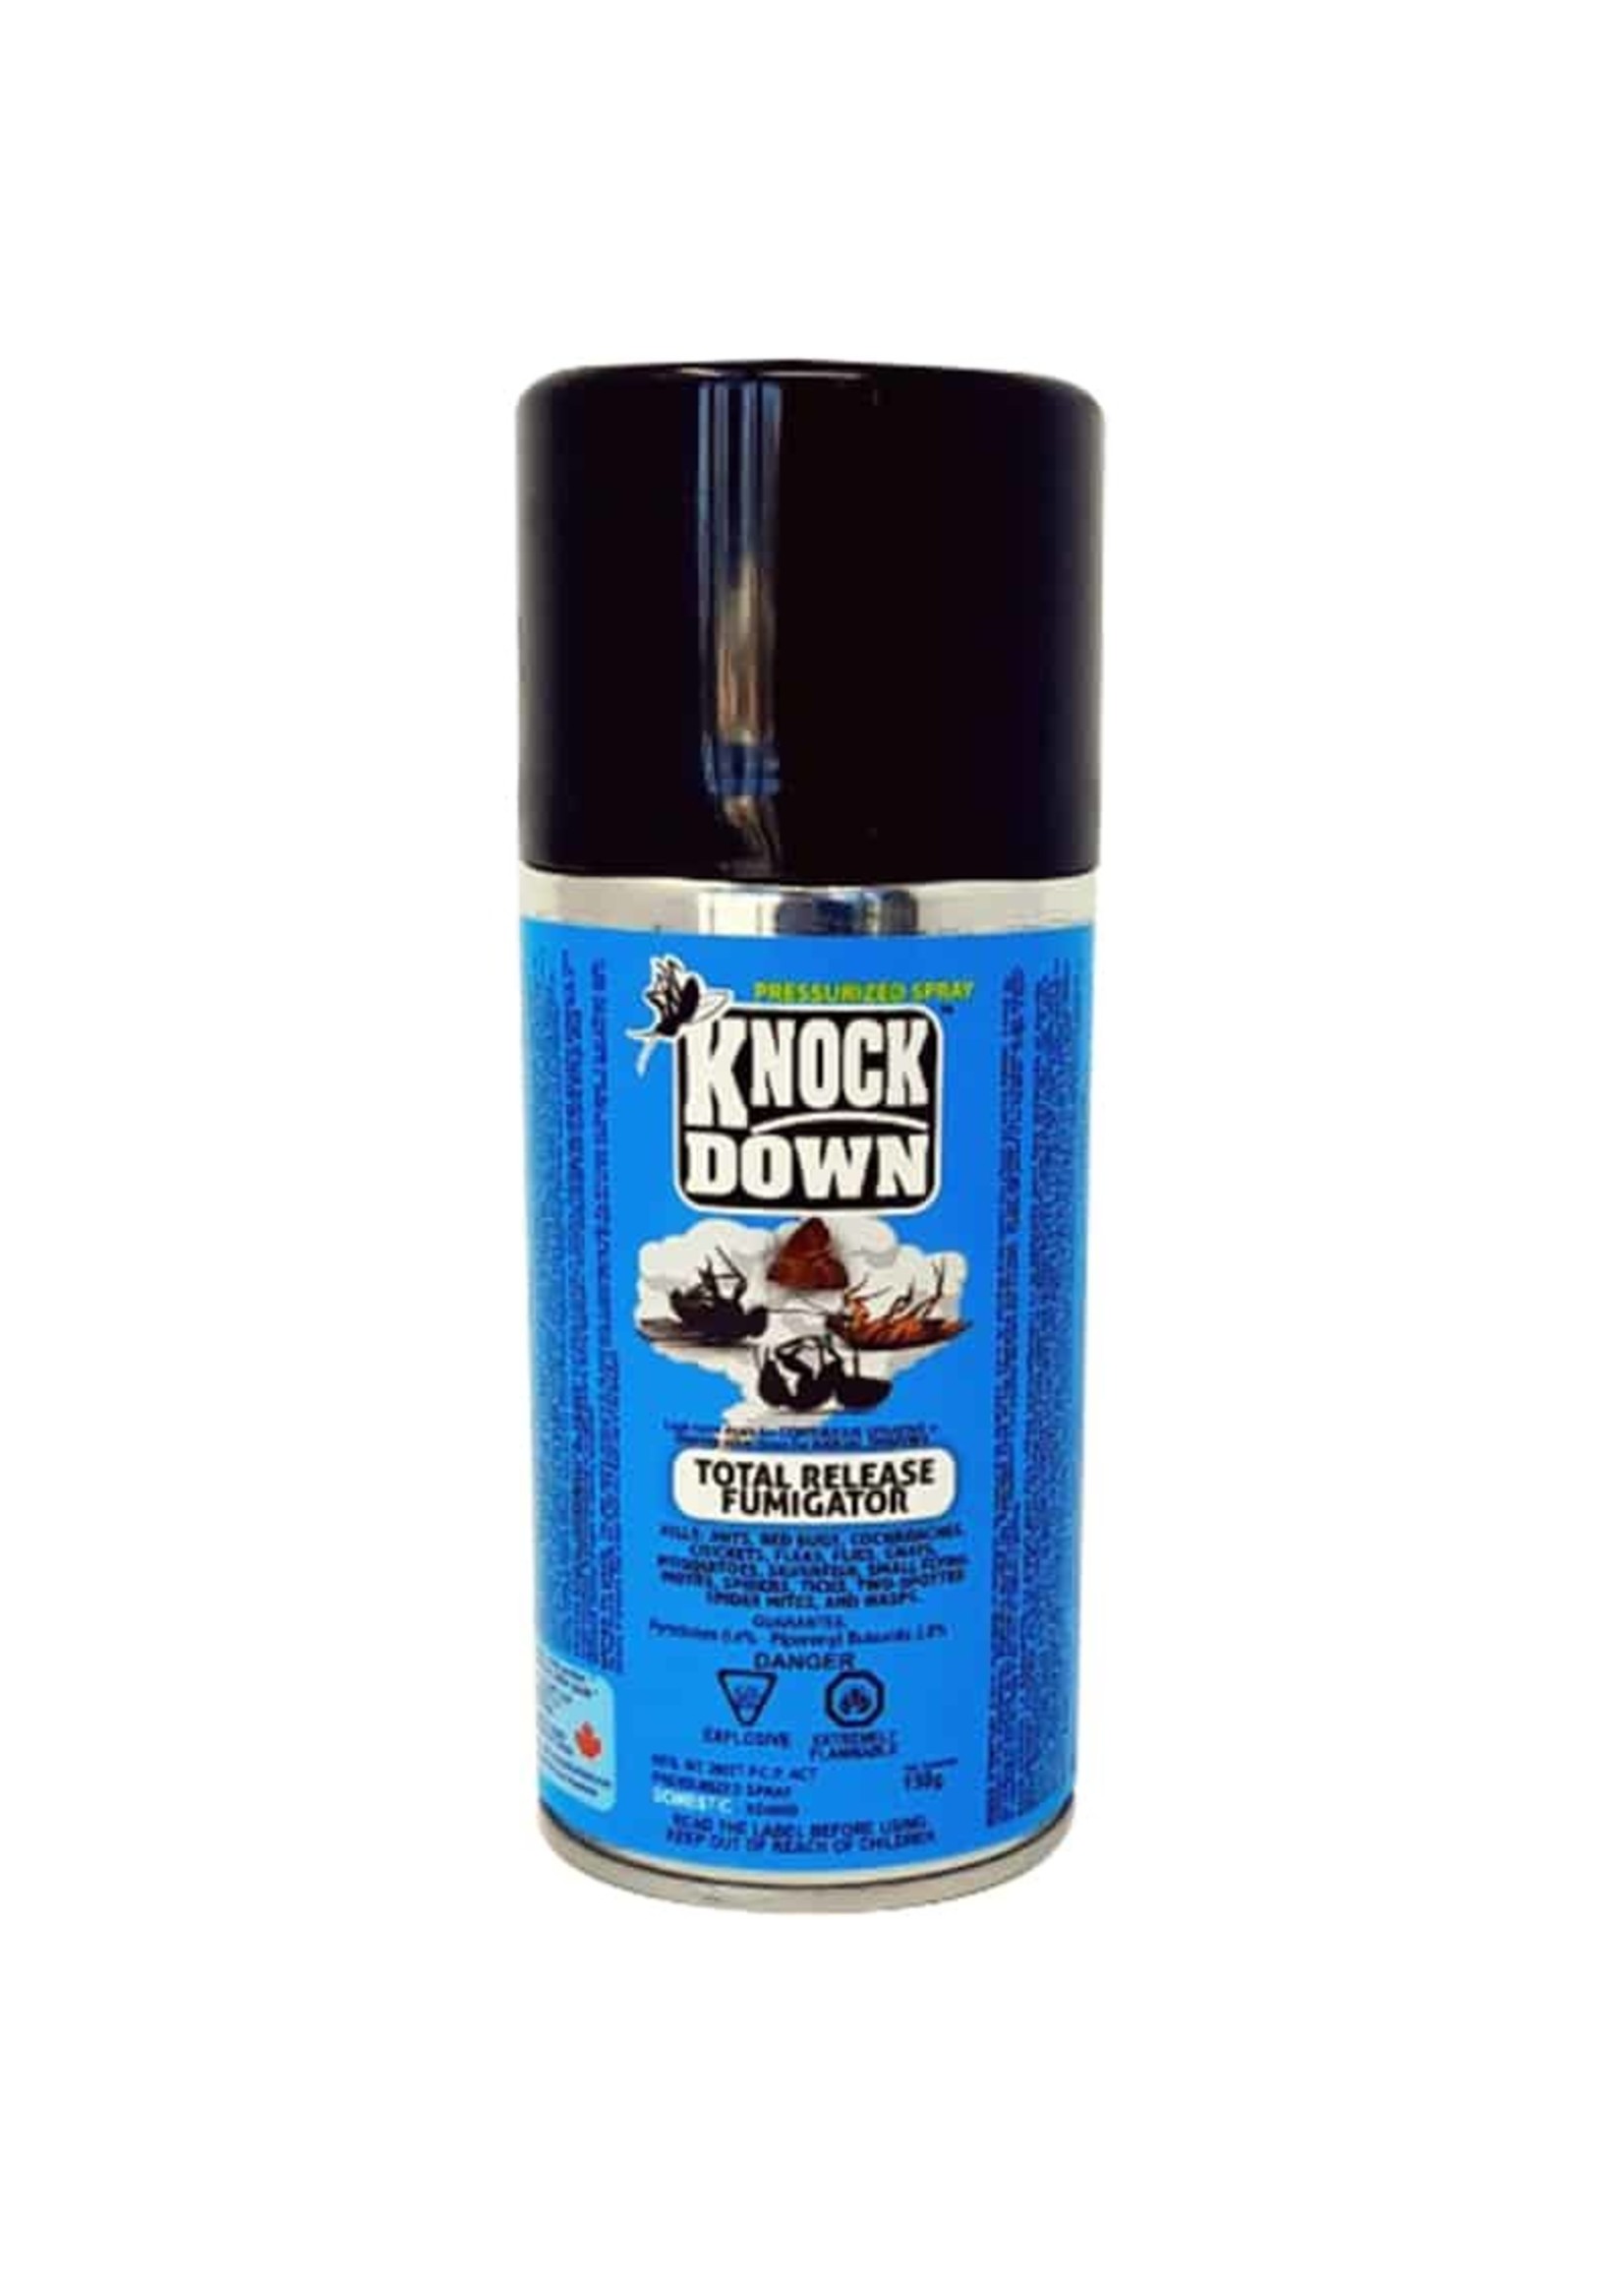 Knock Down Knock Down Total Release Fumigator, 150g